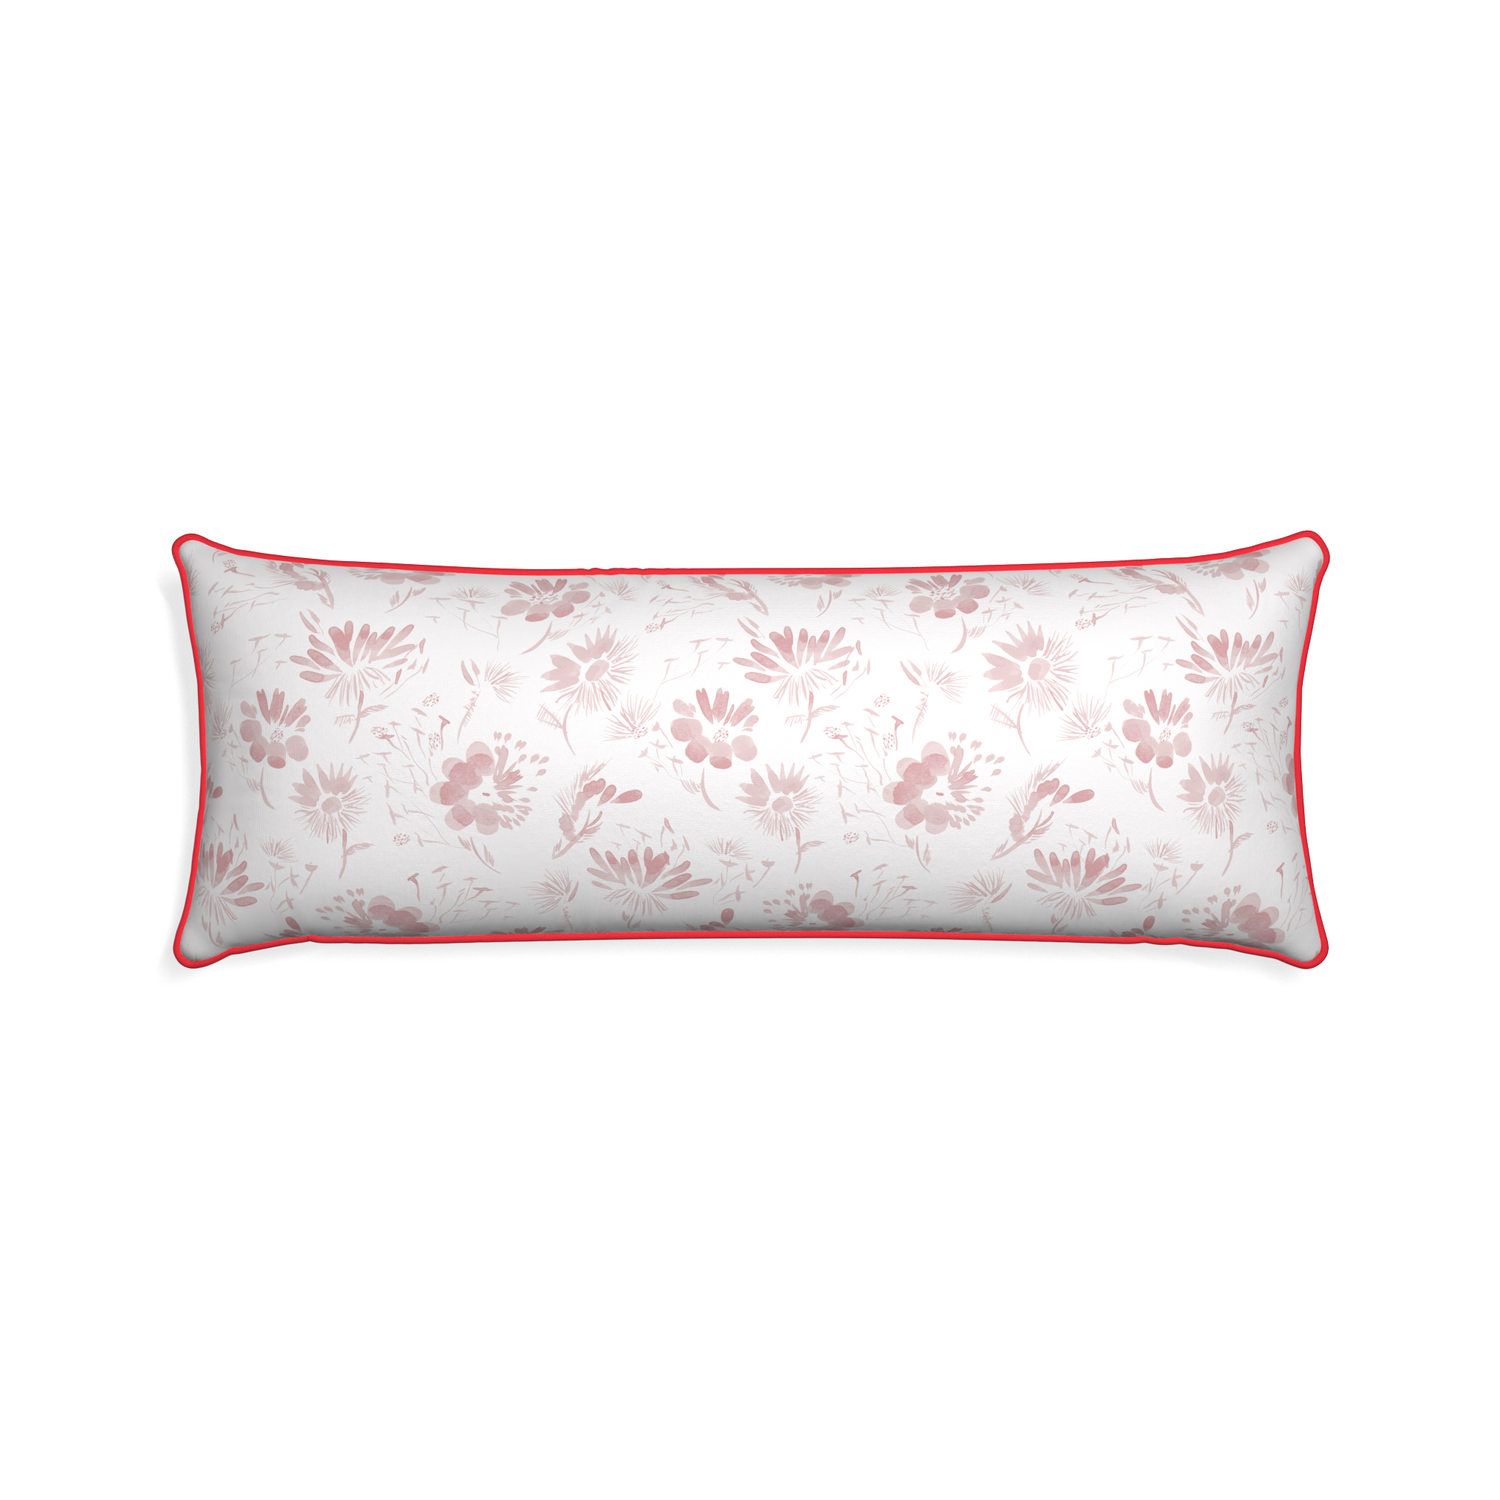 Xl-lumbar blake custom pink floralpillow with cherry piping on white background